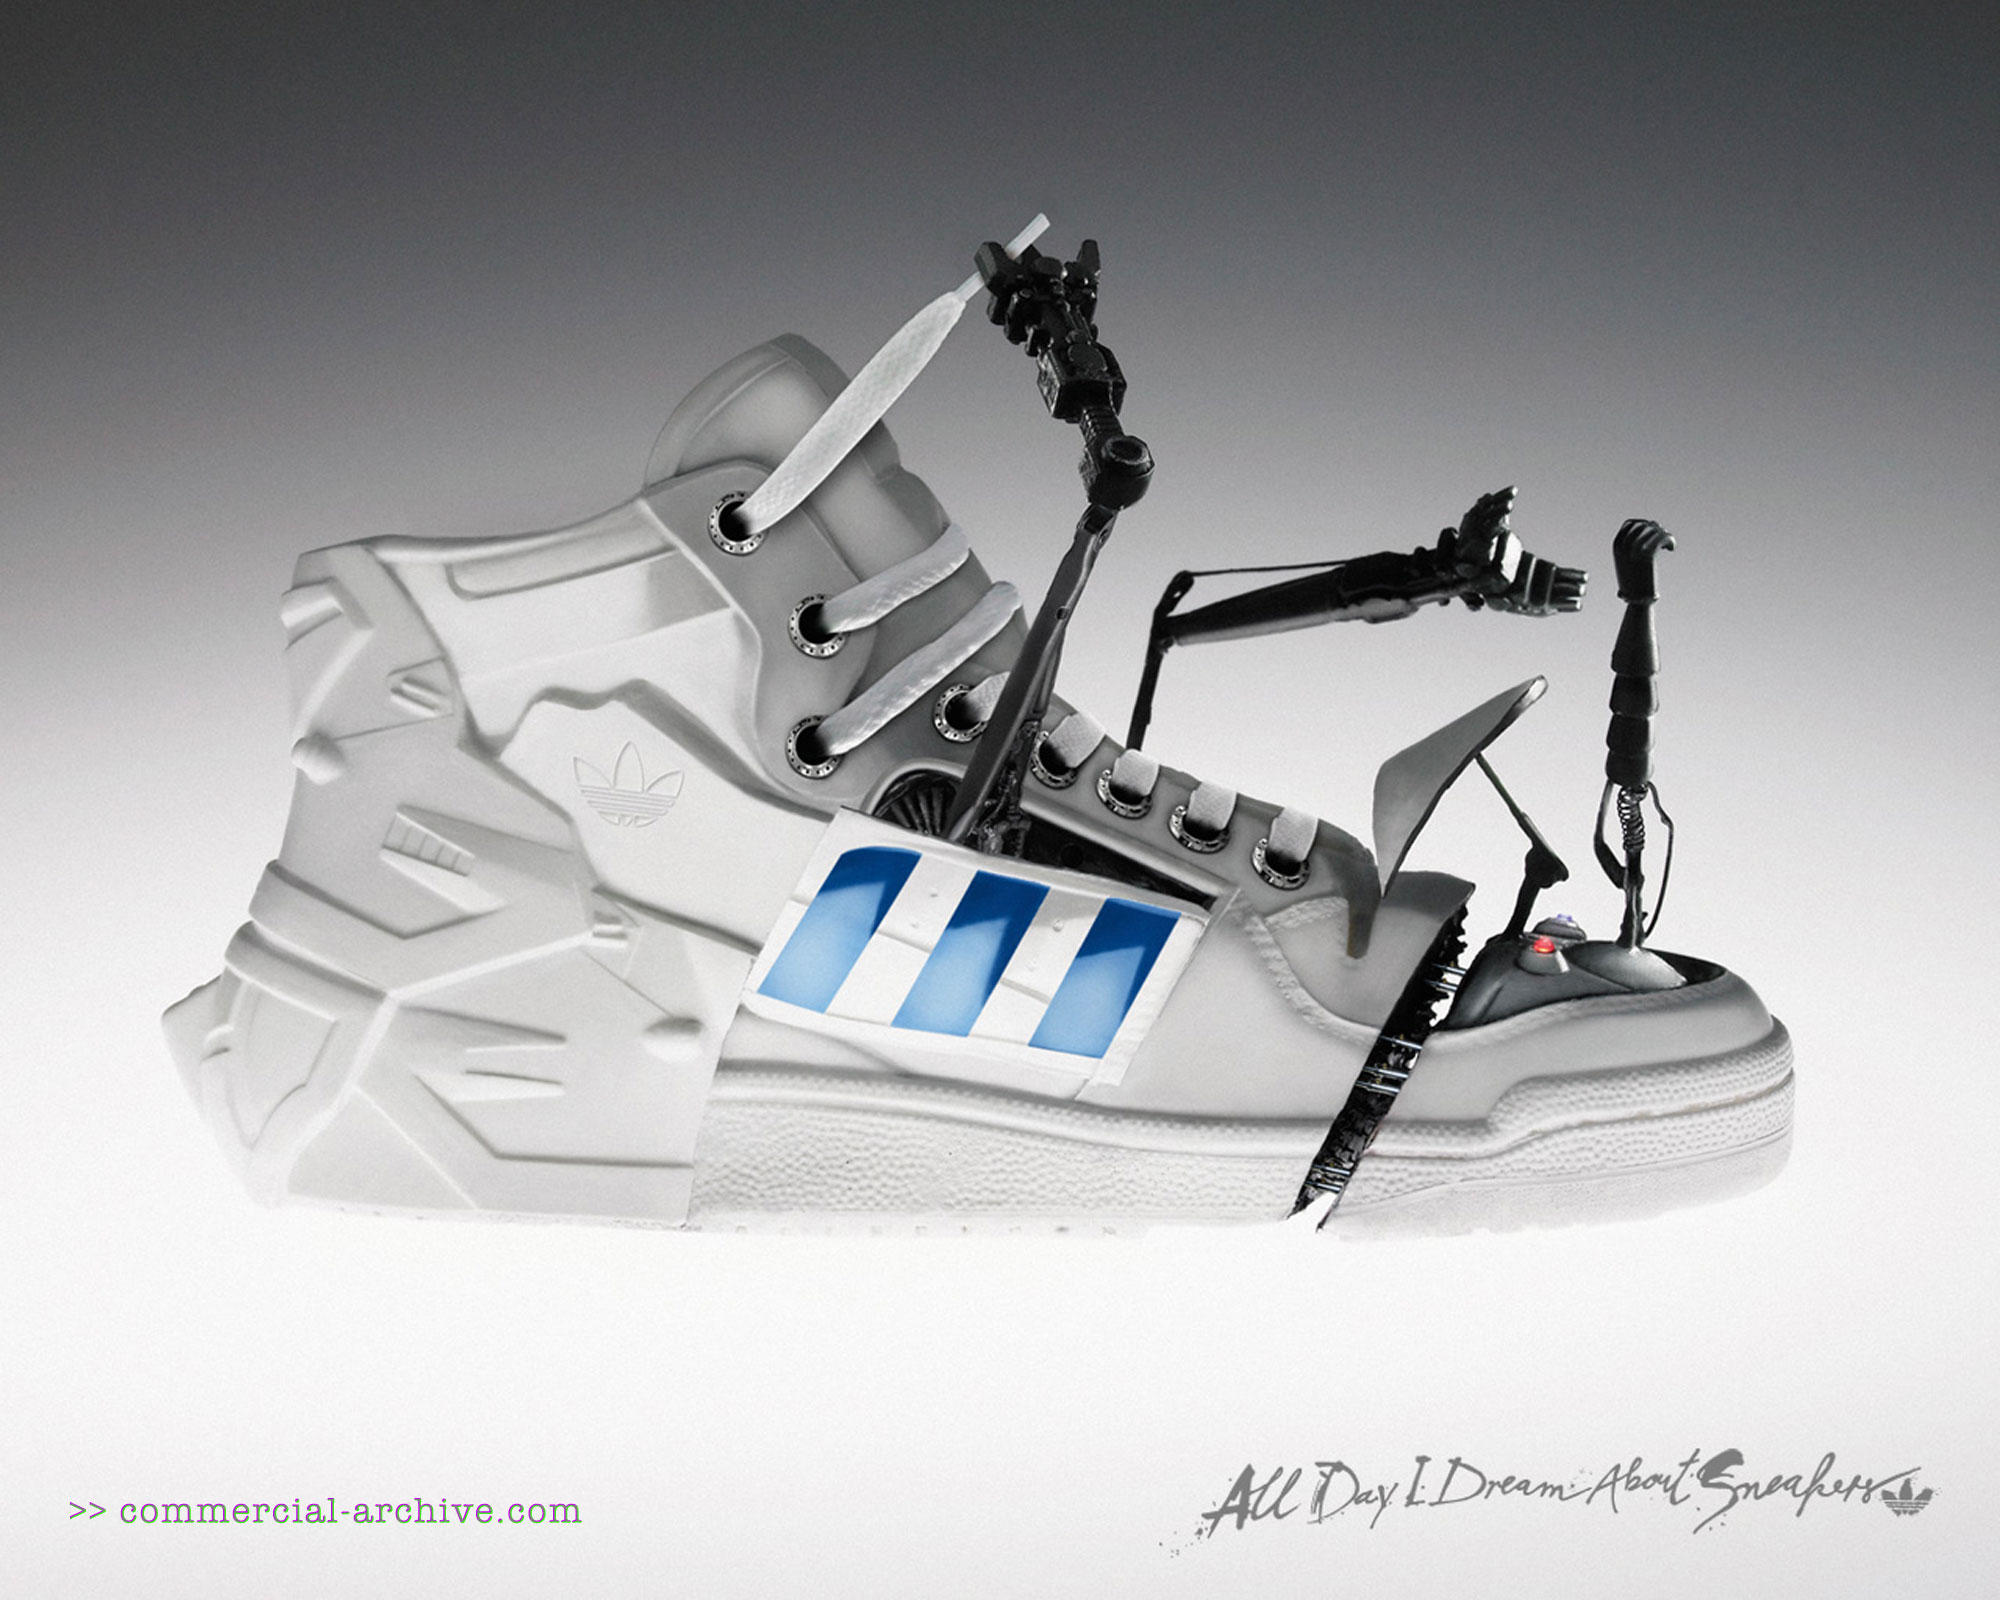 Adidas “All Day I Dream About Sneakers” Airbag / Robot / tree - print, Australia Adland®